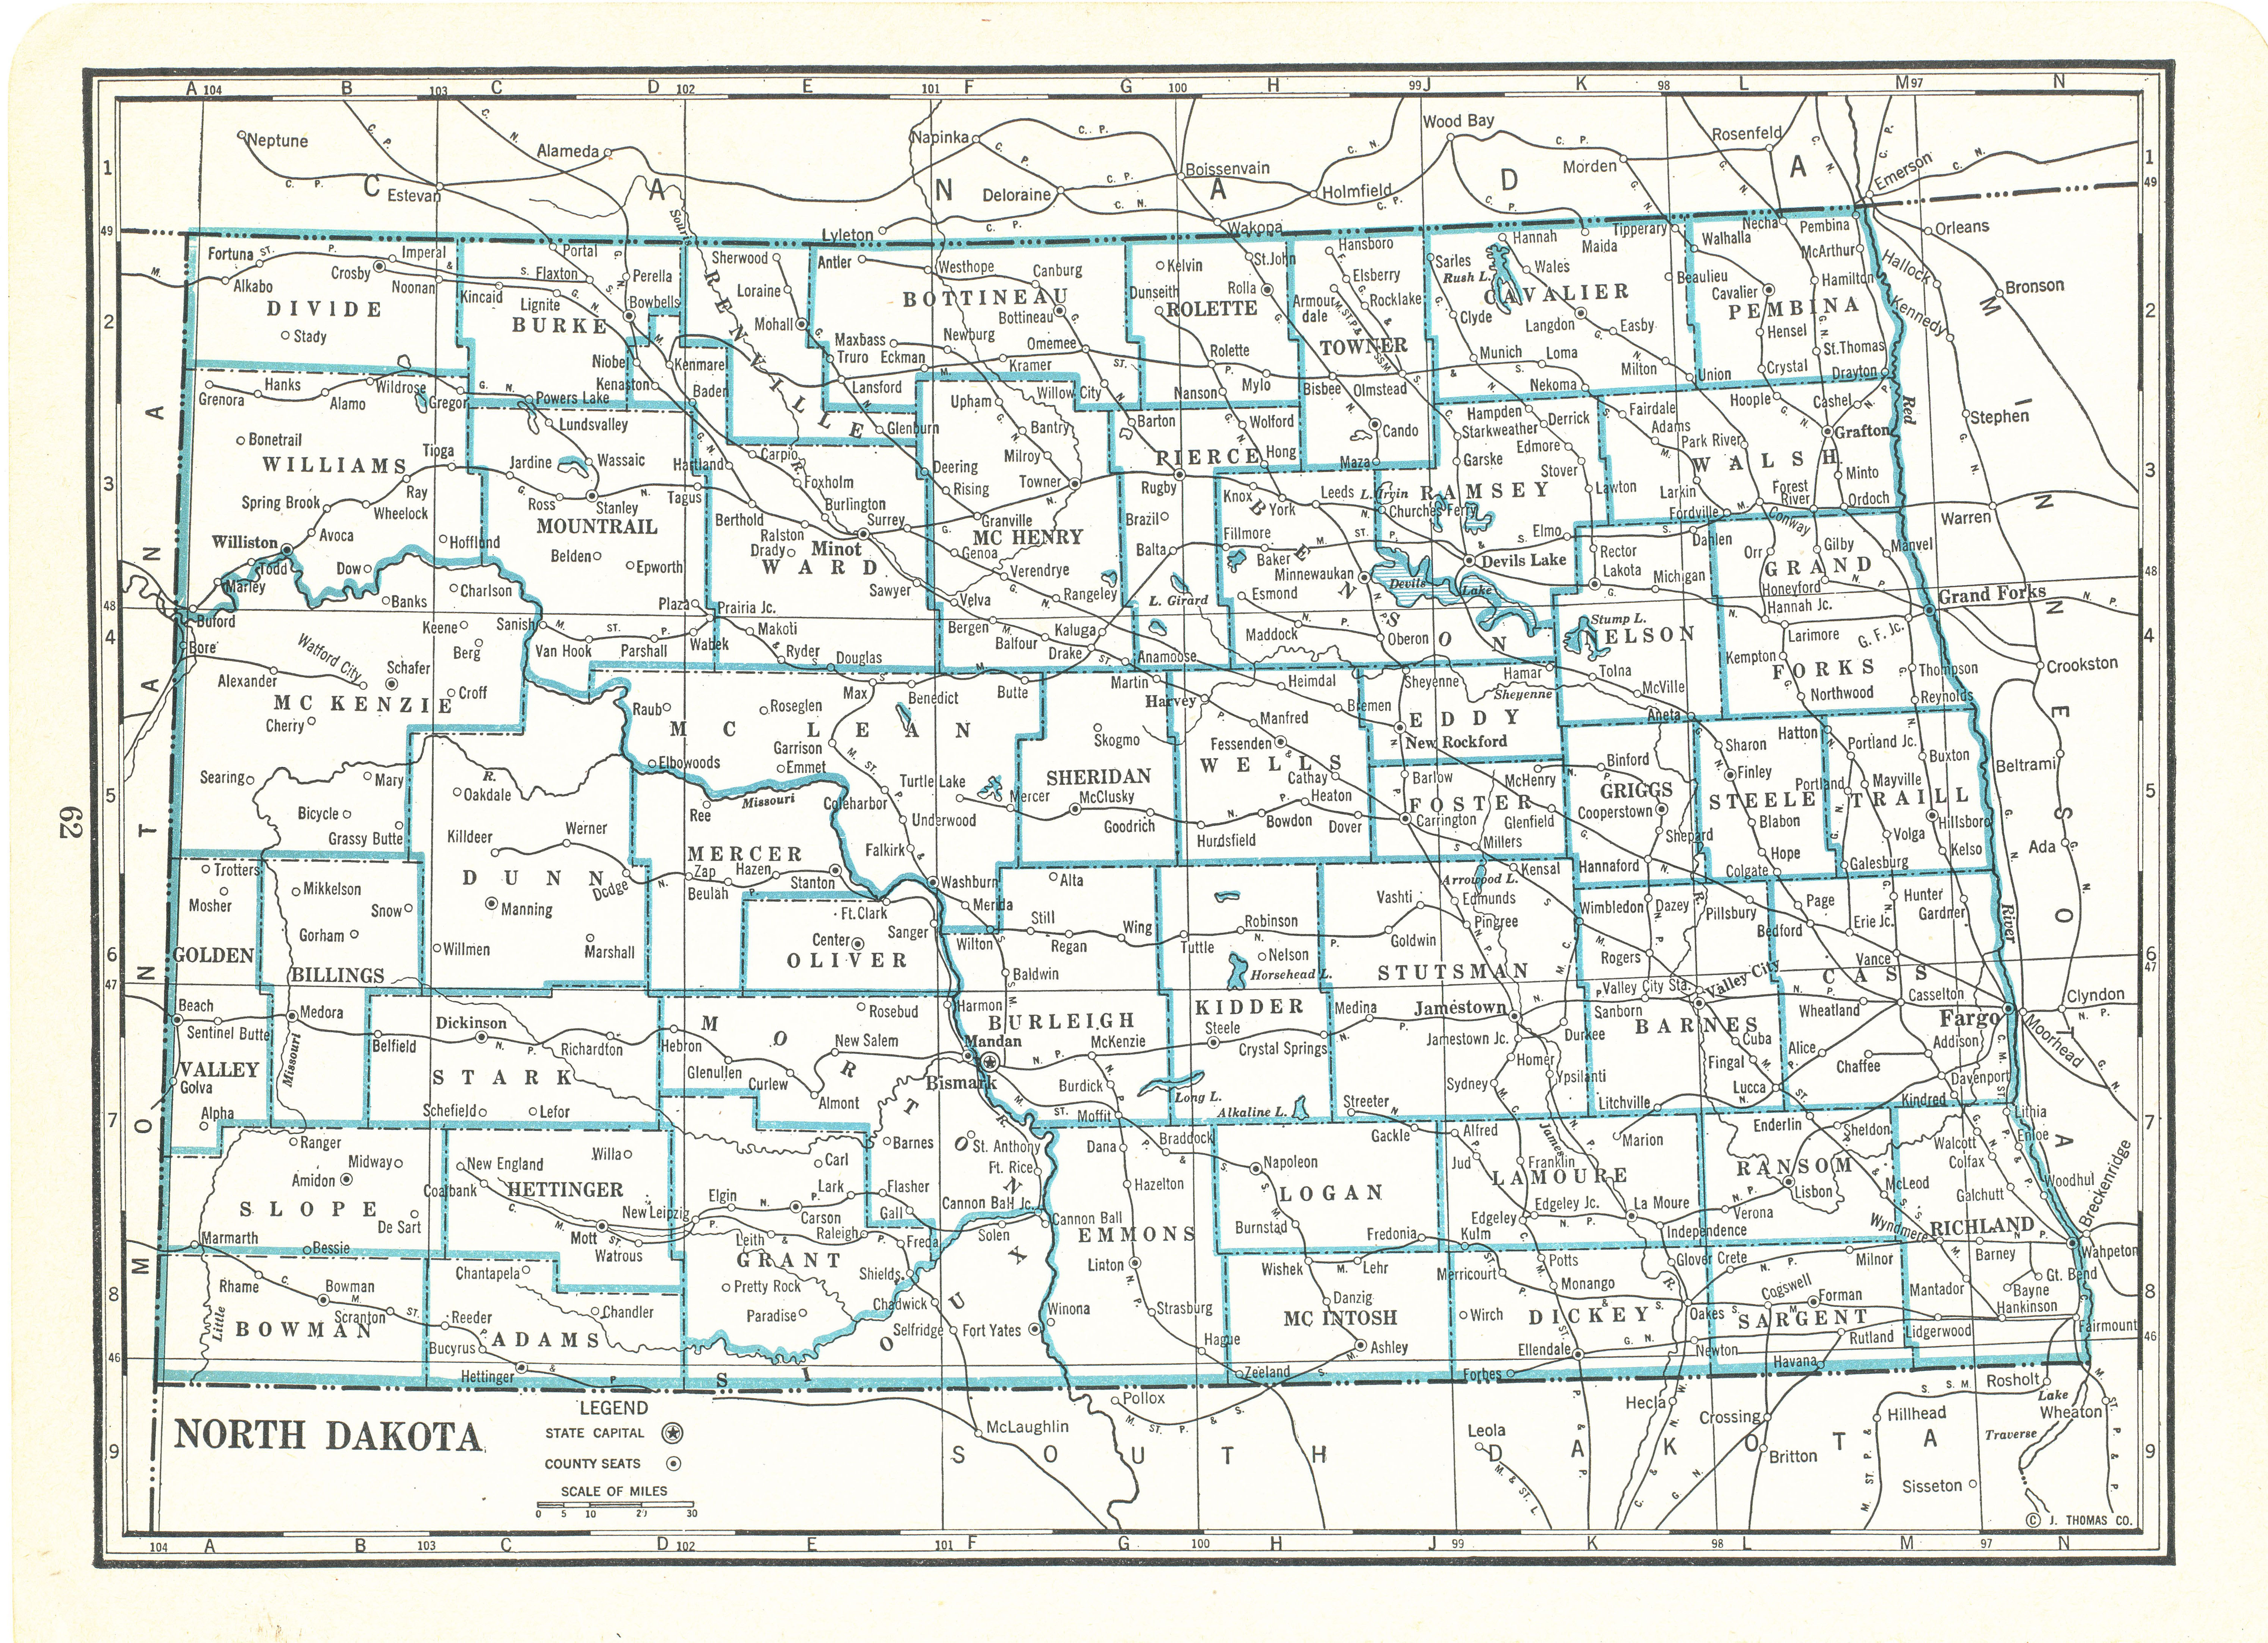 1935 Atlas of the World Vintage Map Pages - North Dakota Map on one side and ...